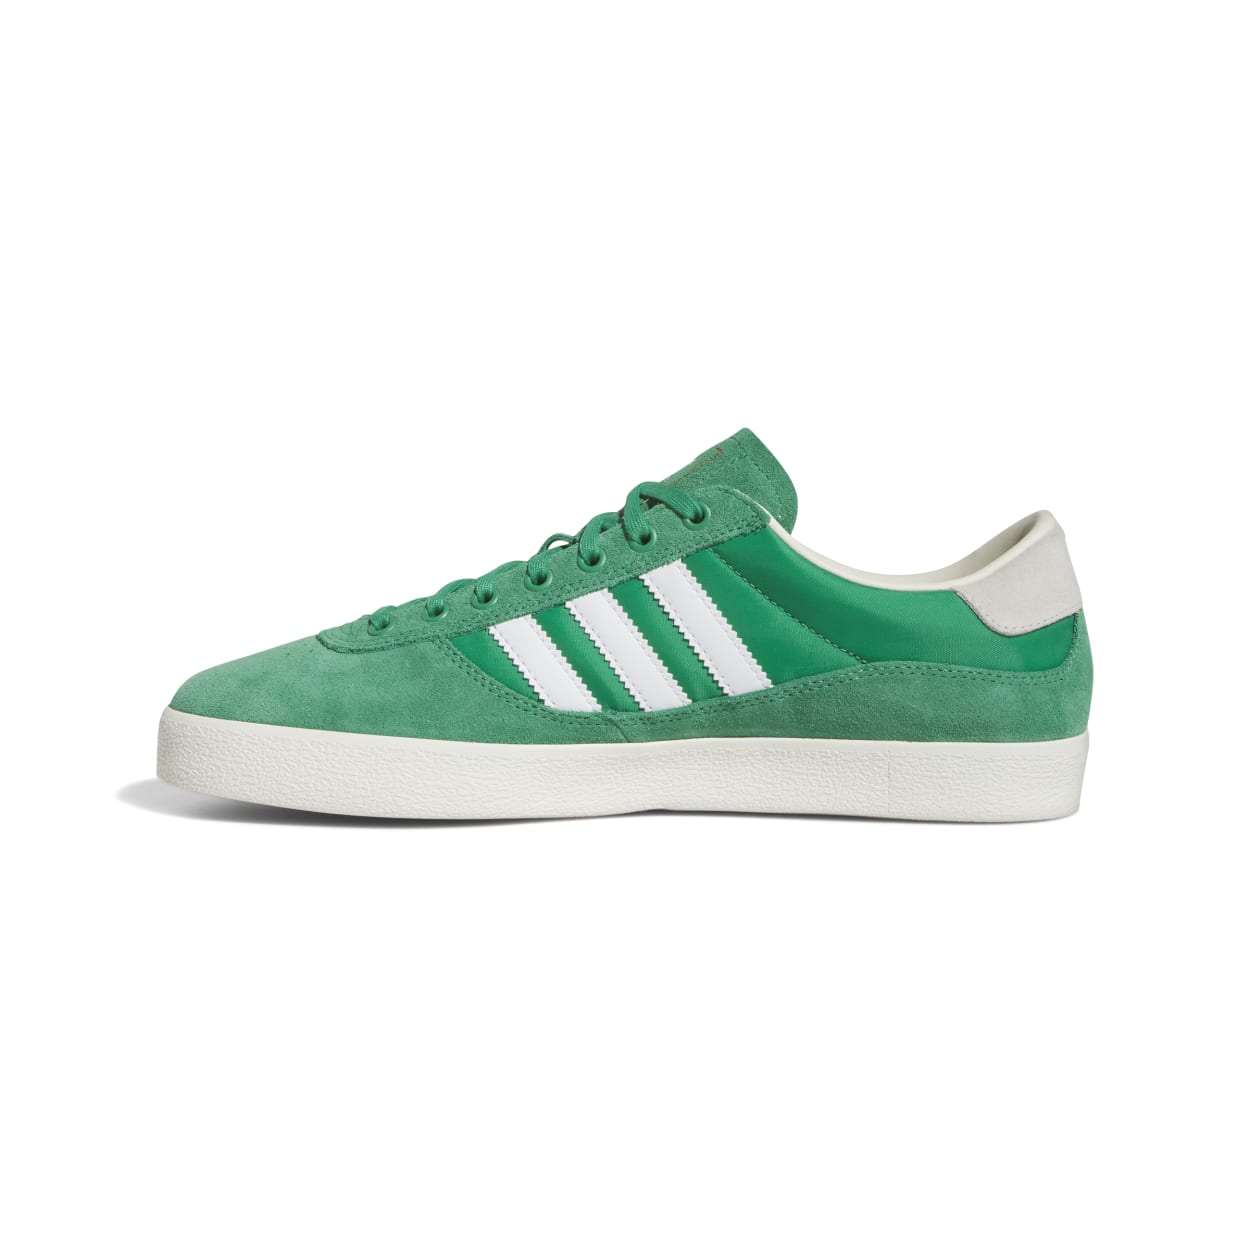 ADIDAS - PUIG INDOOR SHOES - COURT GREEN / WHITE